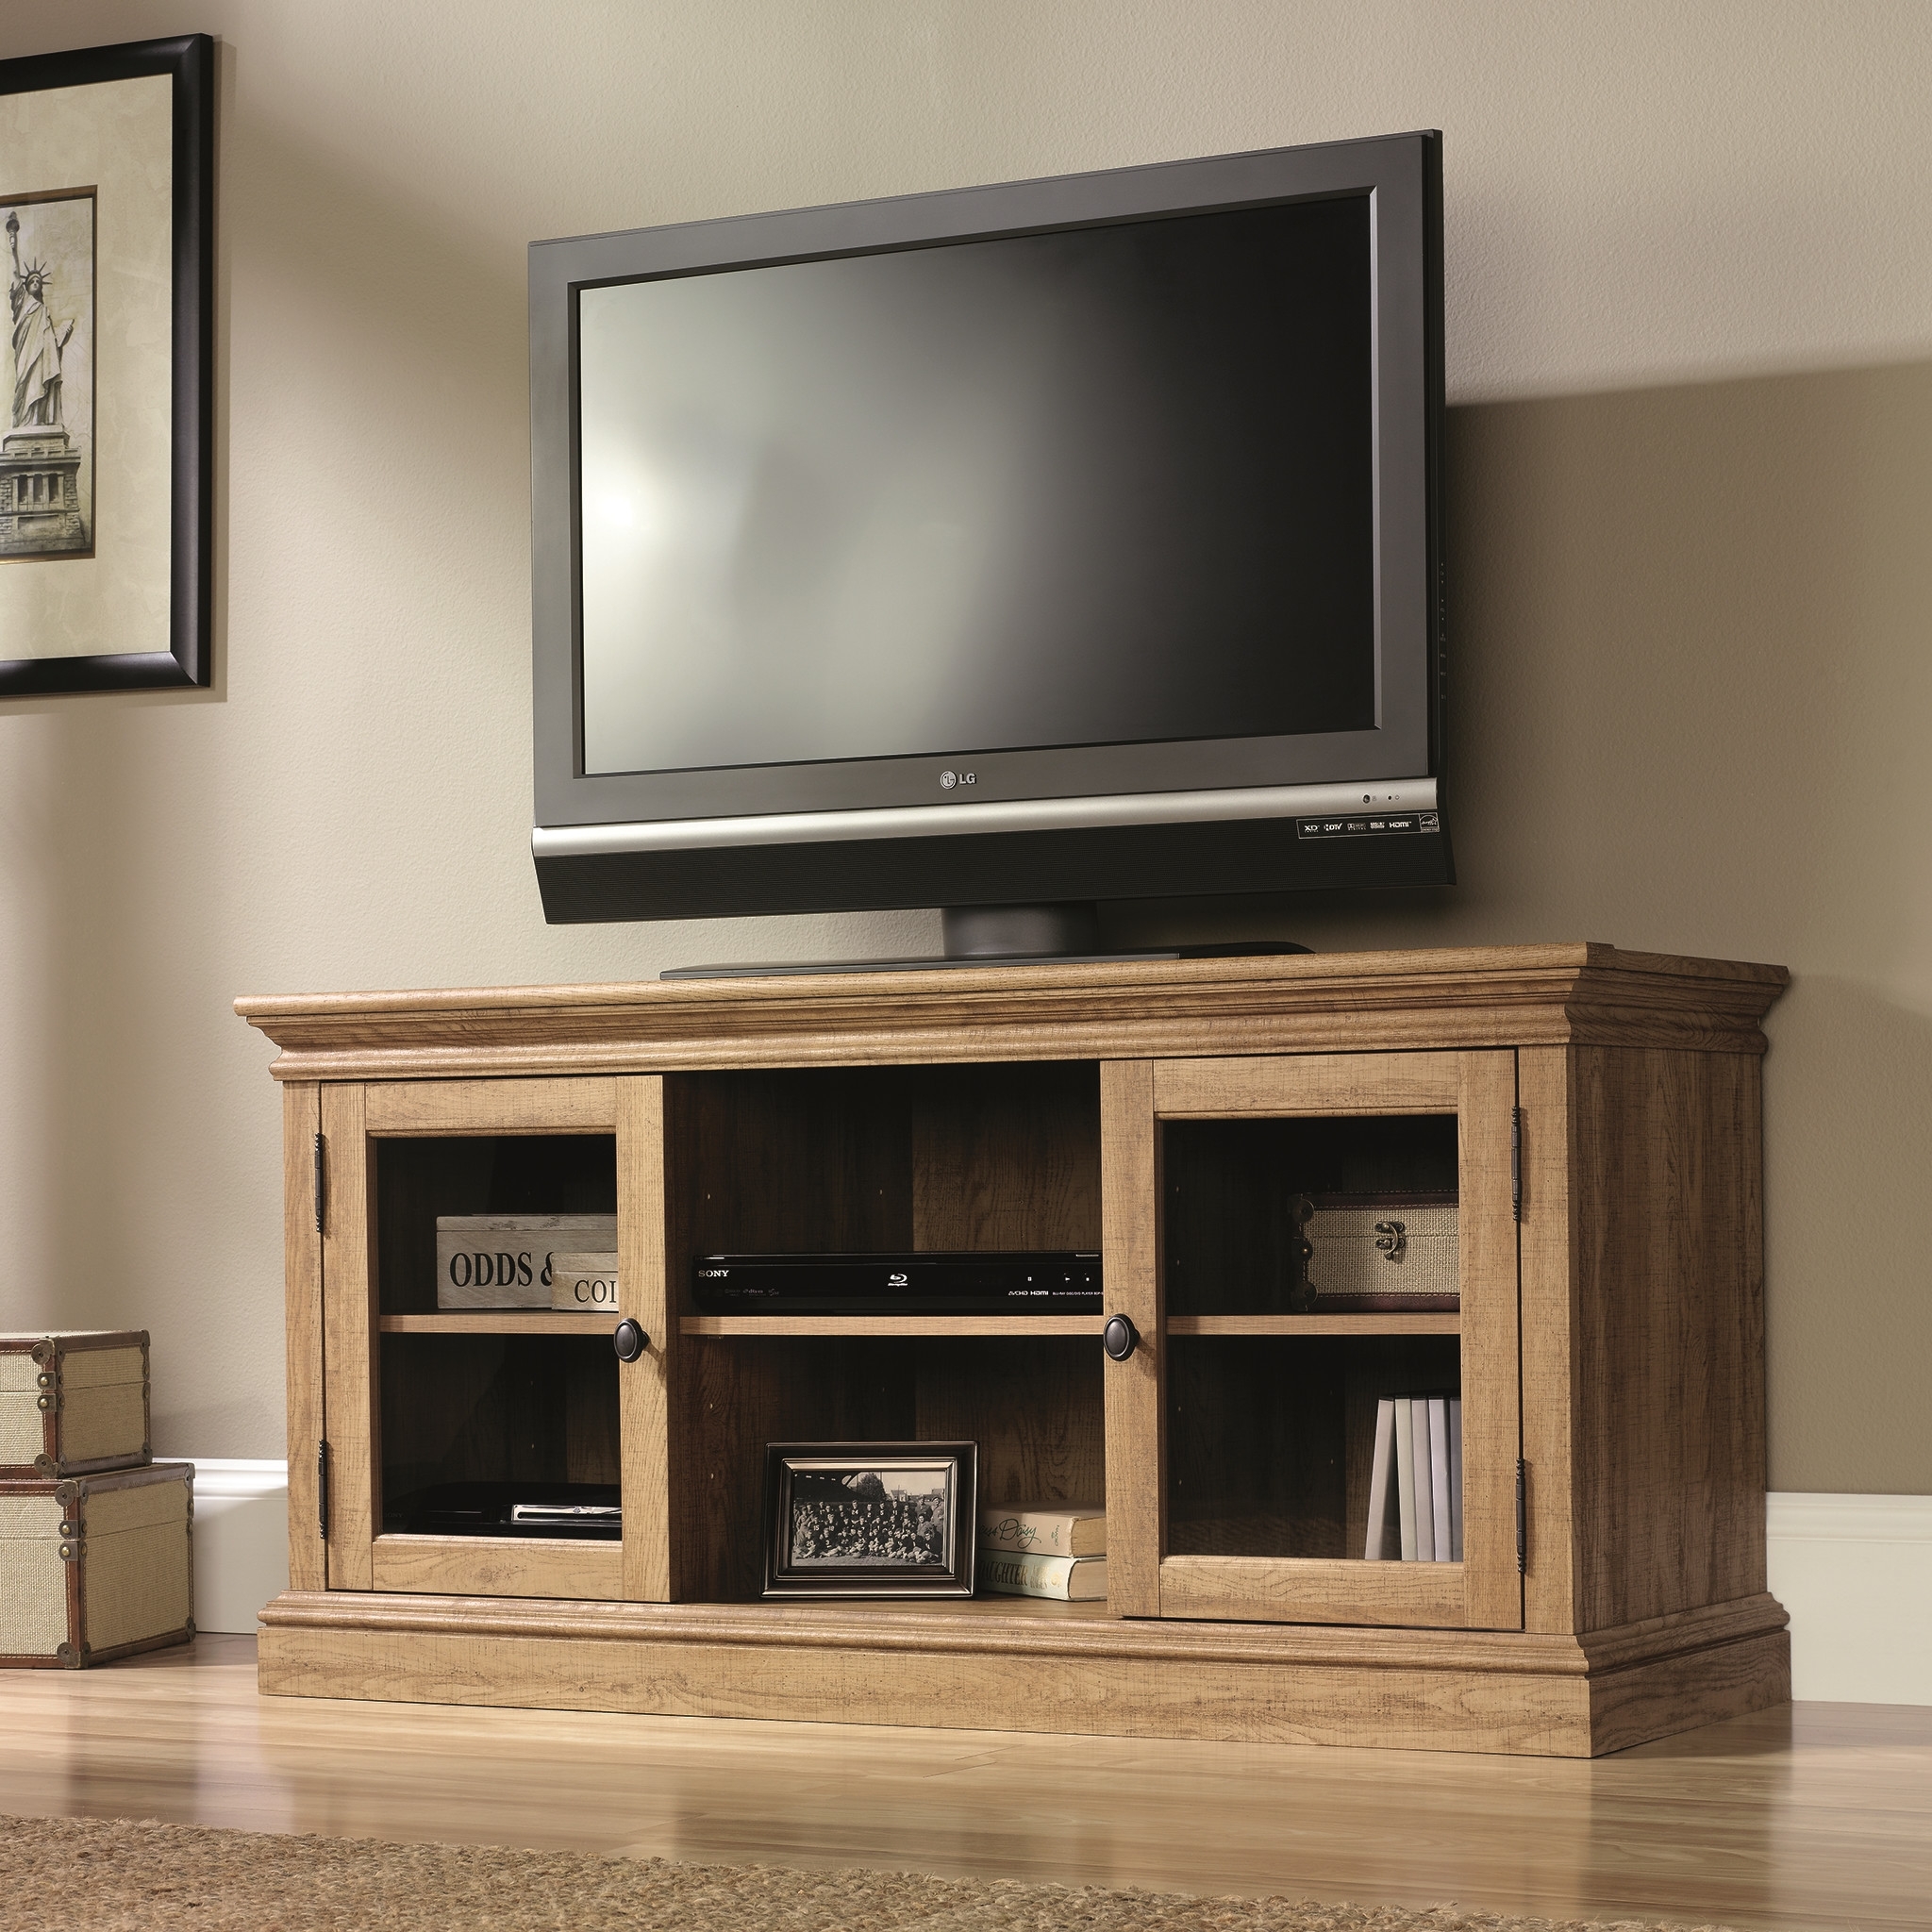 Greig 60" TV Stand - Scribbed Oak - 25.79" H x 53.25" W x 19.45" D - Image 1